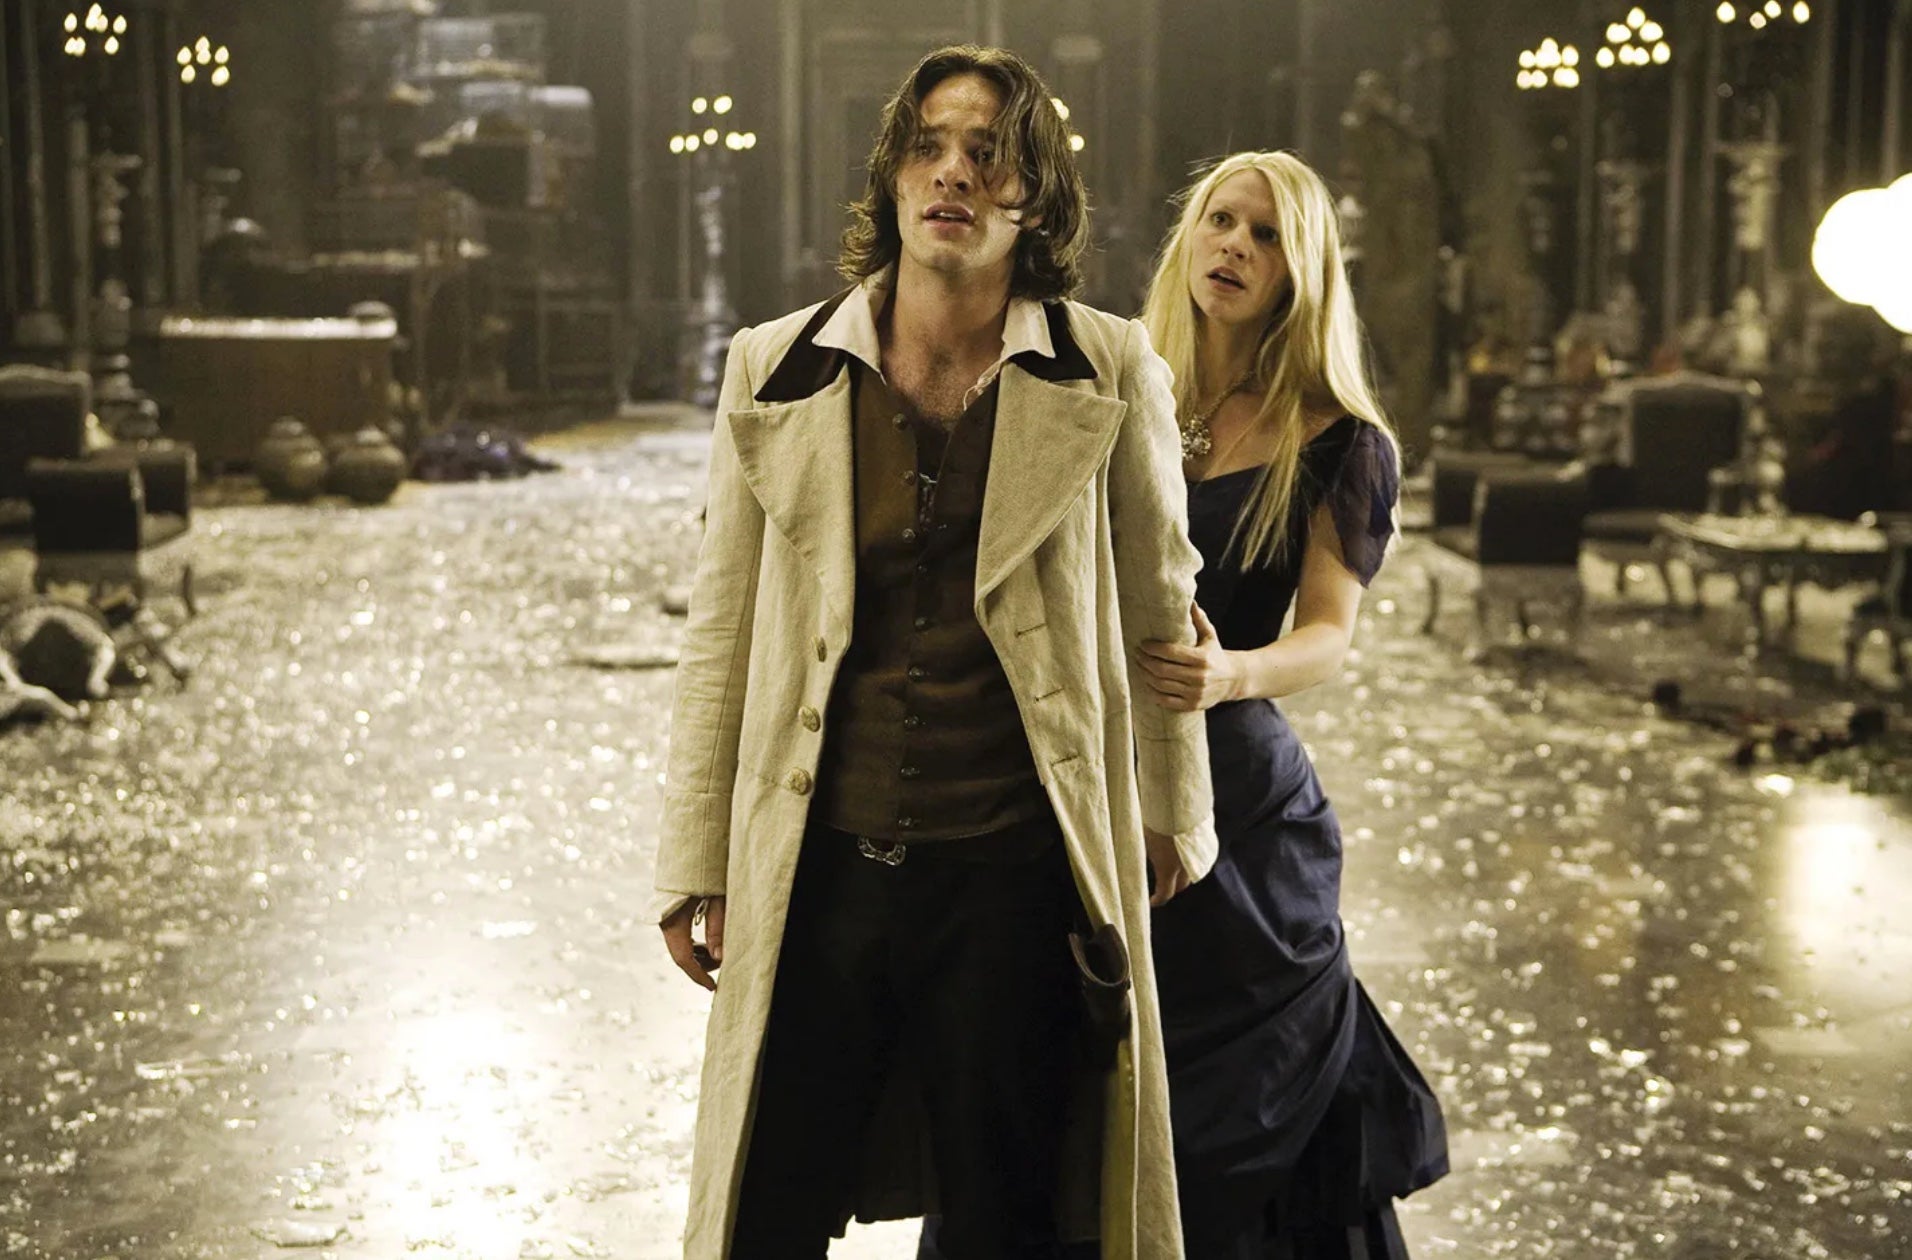 Tristan and Yvaine. (Image: Paramount)